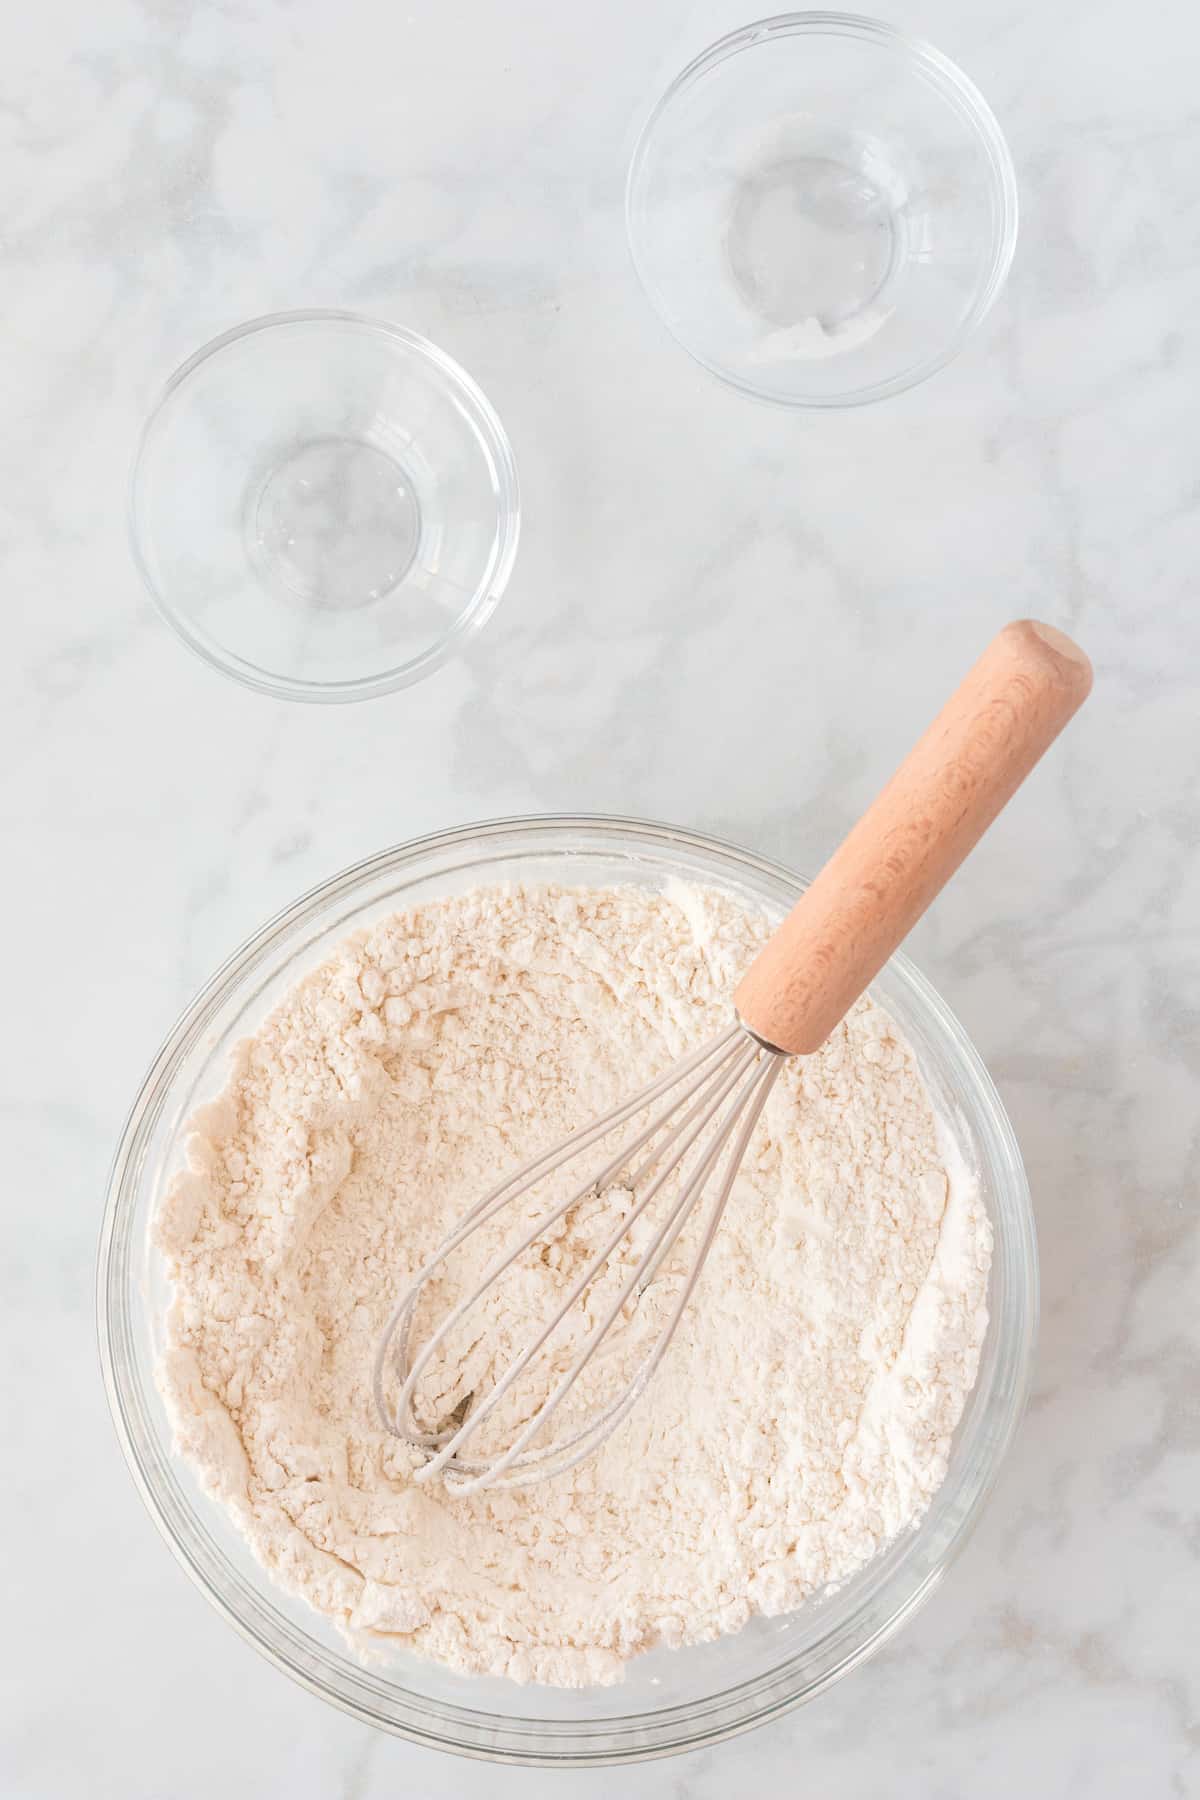 whisking the dry ingredients together in a large glass bowl